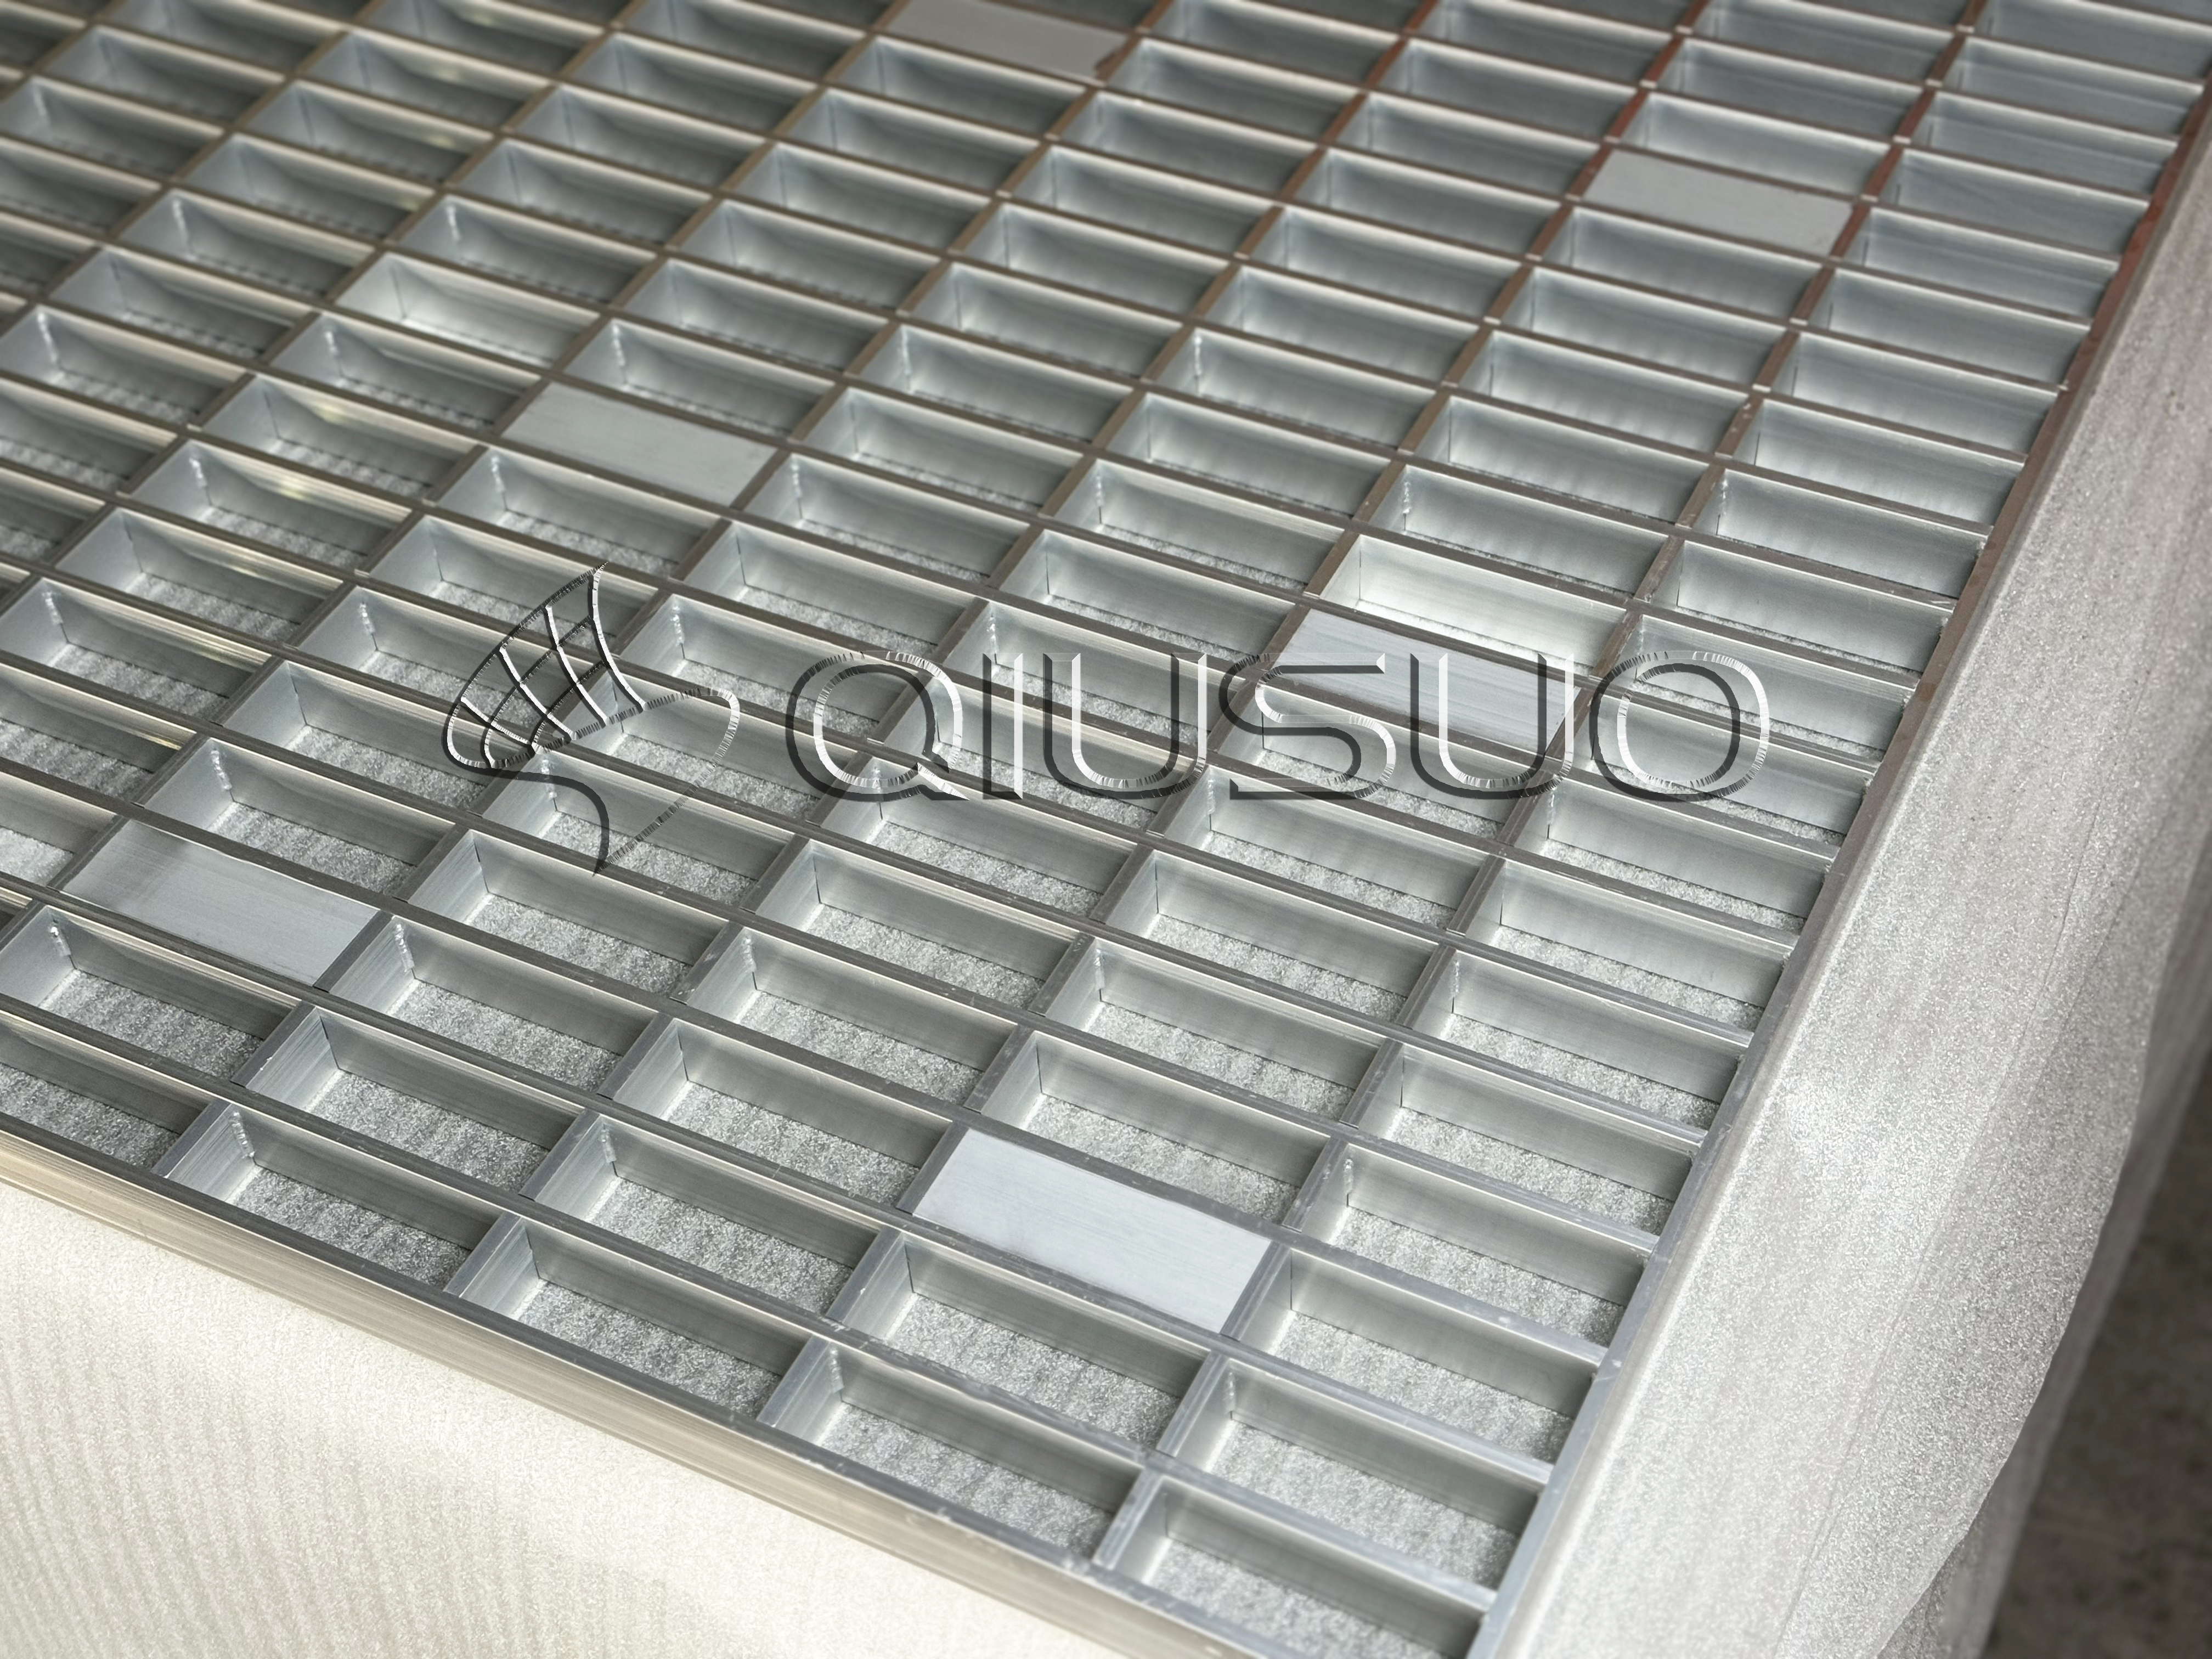 This is a close-up view picture of 6061 anodized aluminum bar grating.